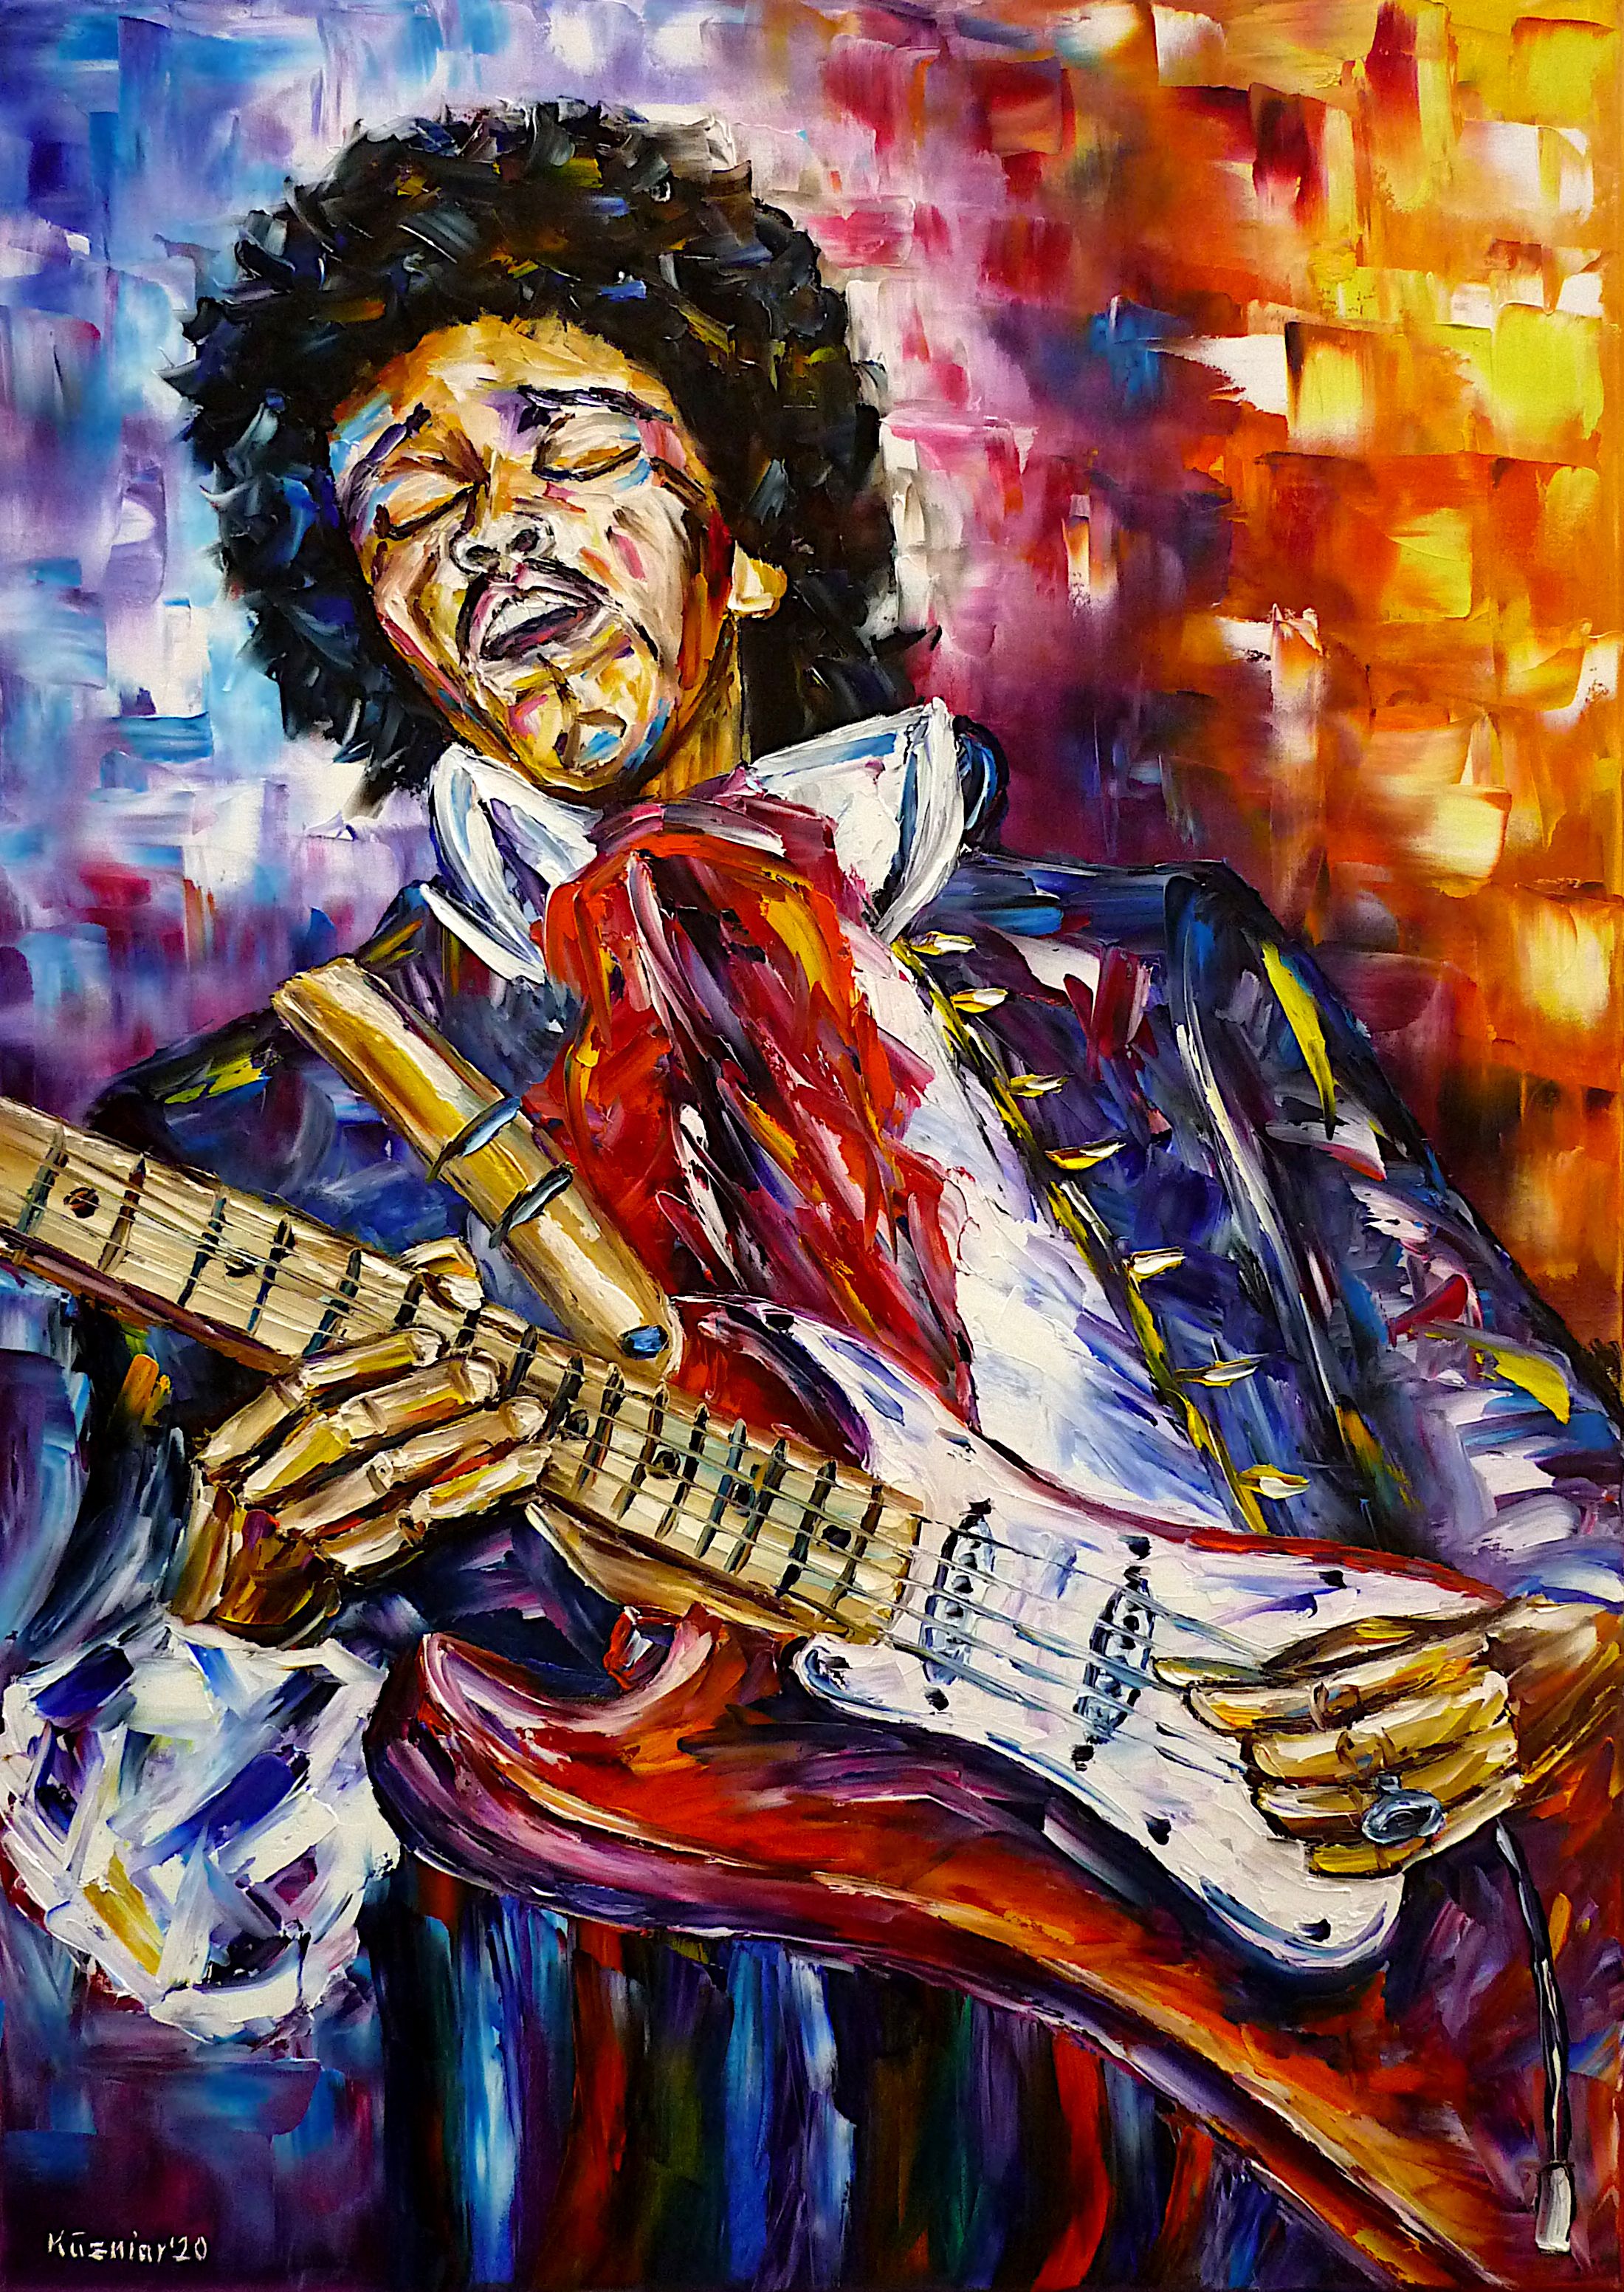 jimihendrixpainting,jimihendrixpicture,jimihendrixportrait,musicianpainting,musicianportrait,makingmusic,playingmusic,musical,guitarist,guitarplayer,playingguitar,manwithguitar,coloredpainting,coloredportrait,coloredman,rockmusic,rockmusician,peoplepainting,colorfulportrait,jimihendrixabstract,ilovejimihendrix,jimihendrixlove,jimihendrixlovers,flowerpower,flowerchildren,60s,70s,hippymusic,hippies,cheerfulpicture,joy,friendlypicture,friendlypainting,peace,peacefulpicture,peacefulpainting,paletteknifeoilpainting,modernart,impressionism,artdeco,abstractpainting,livelycolours,colorfulpainting,brightcolors,lightreflections,impastopainting,livingroomart,livingroompicture,livingroompainting